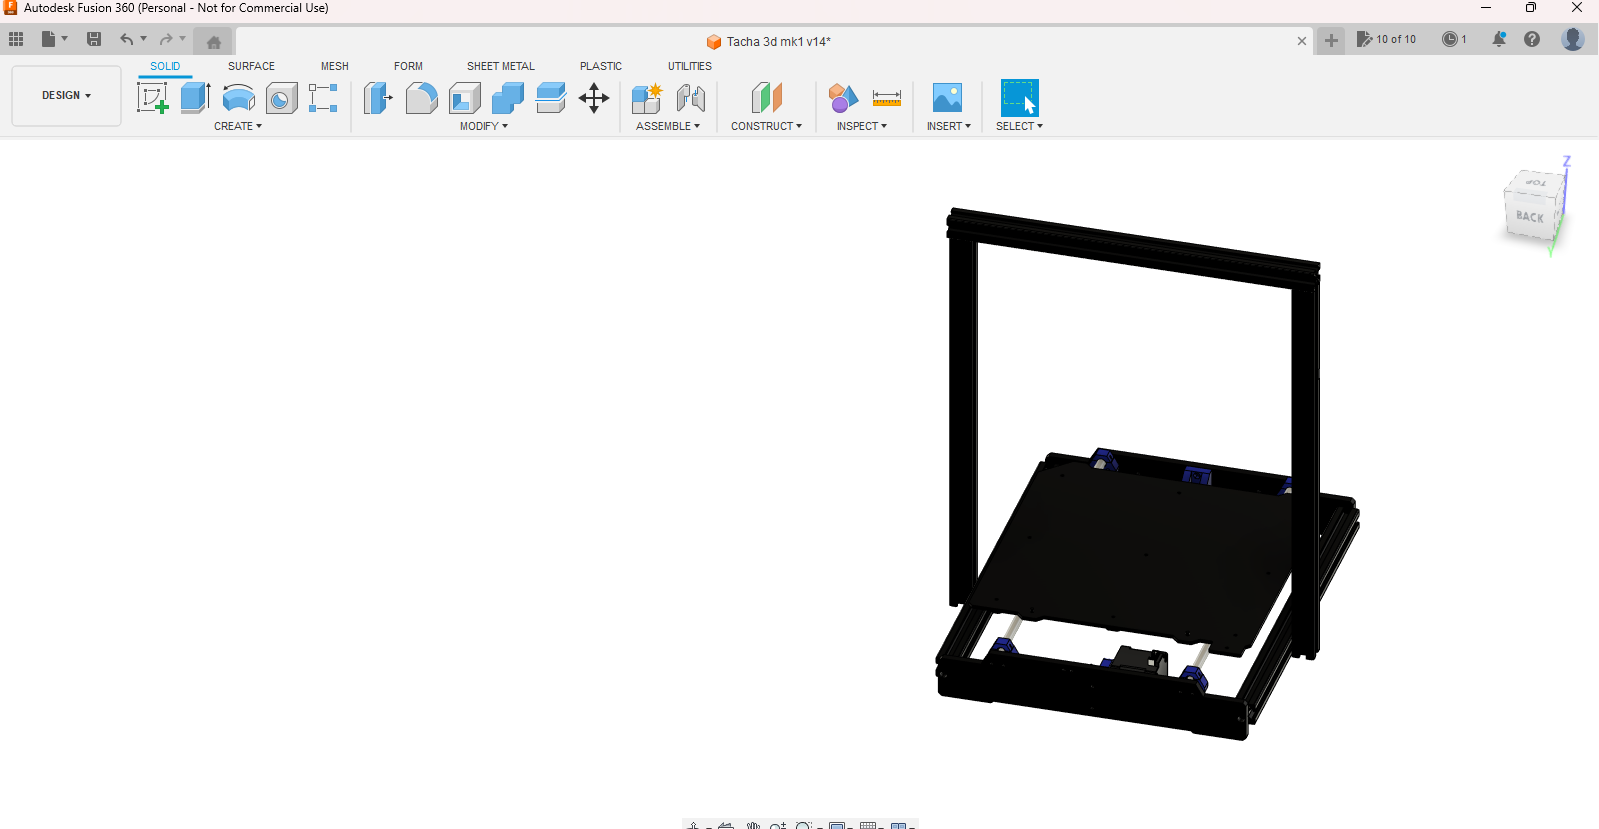 Autodesk Fusion 360 (Personal - Not for Commercial Use) 6_30_2023 9_31_49 PM.png